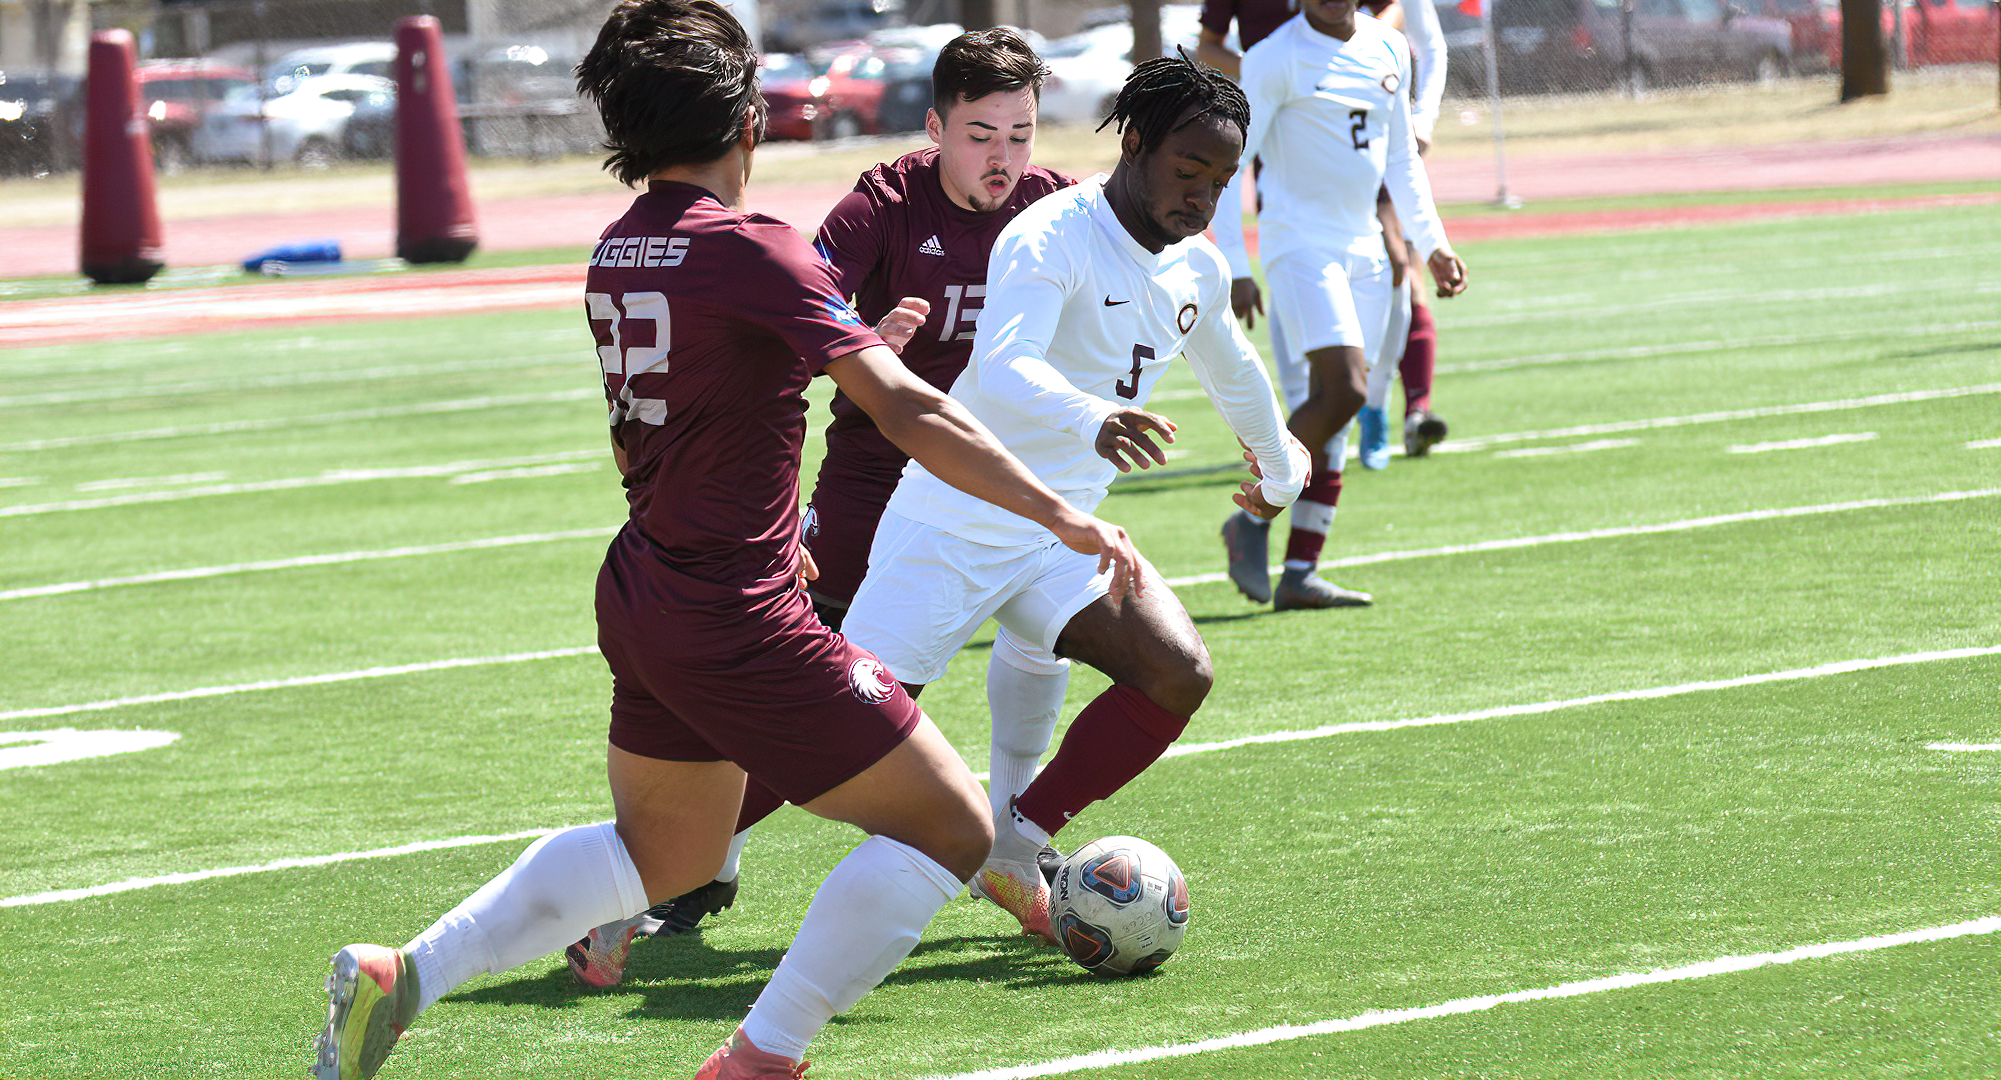 Telvin Vah dribbles between a pair of Augsburg defenders in the Cobbers' 4-3 OT win. Vah had the assist on the late game-tying goal and then scored the game winner in OT.